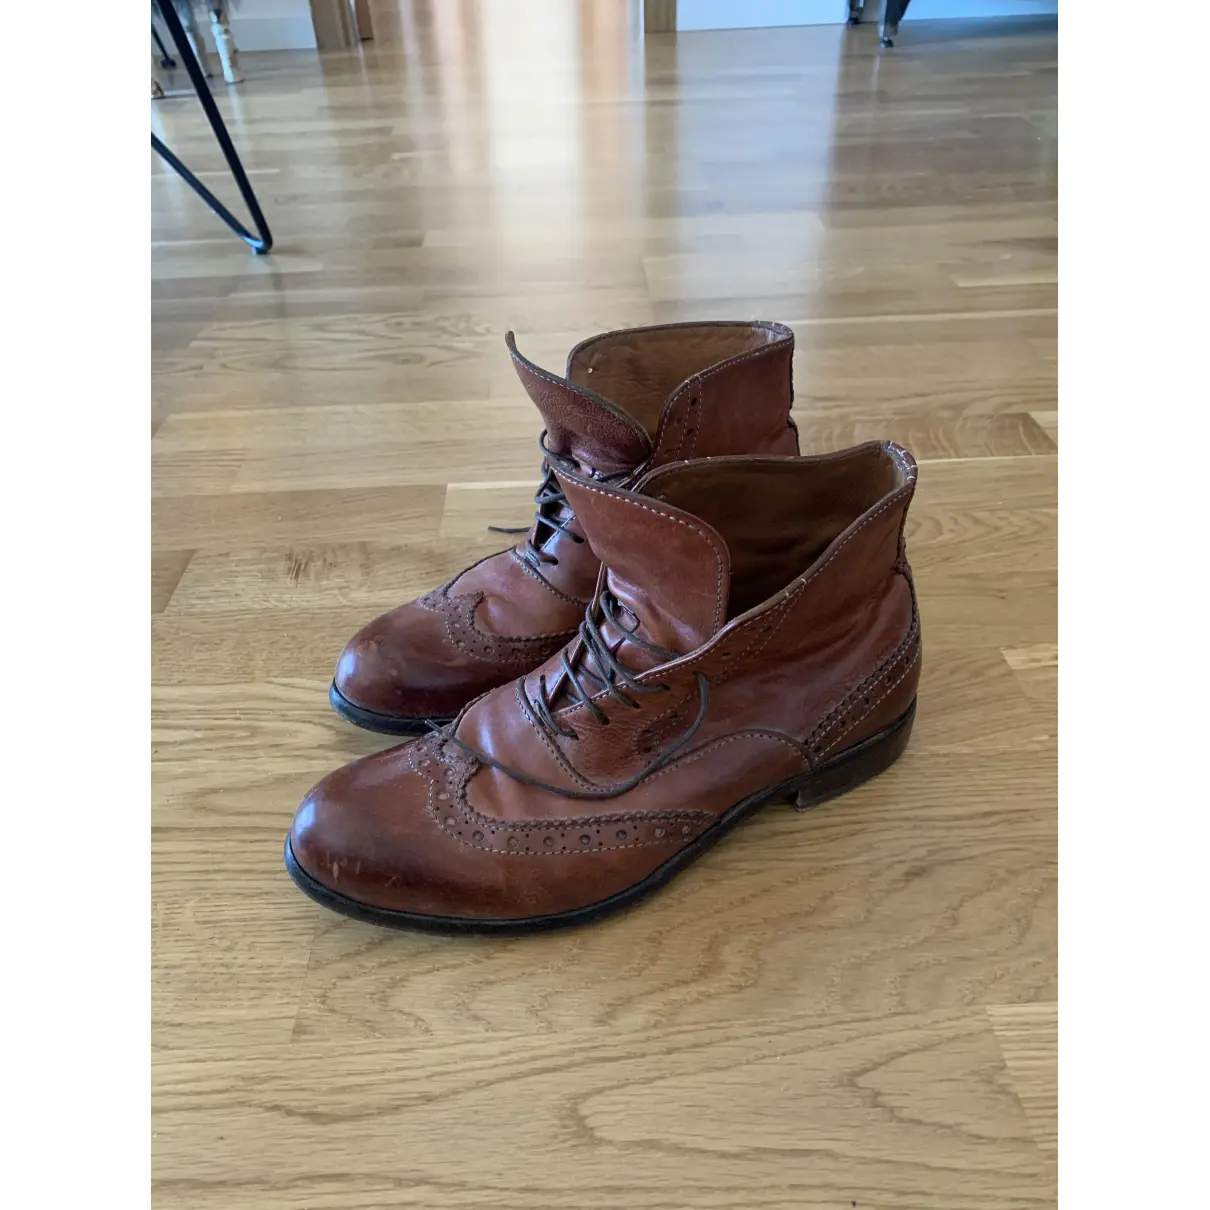 Buy Moma Leather boots online